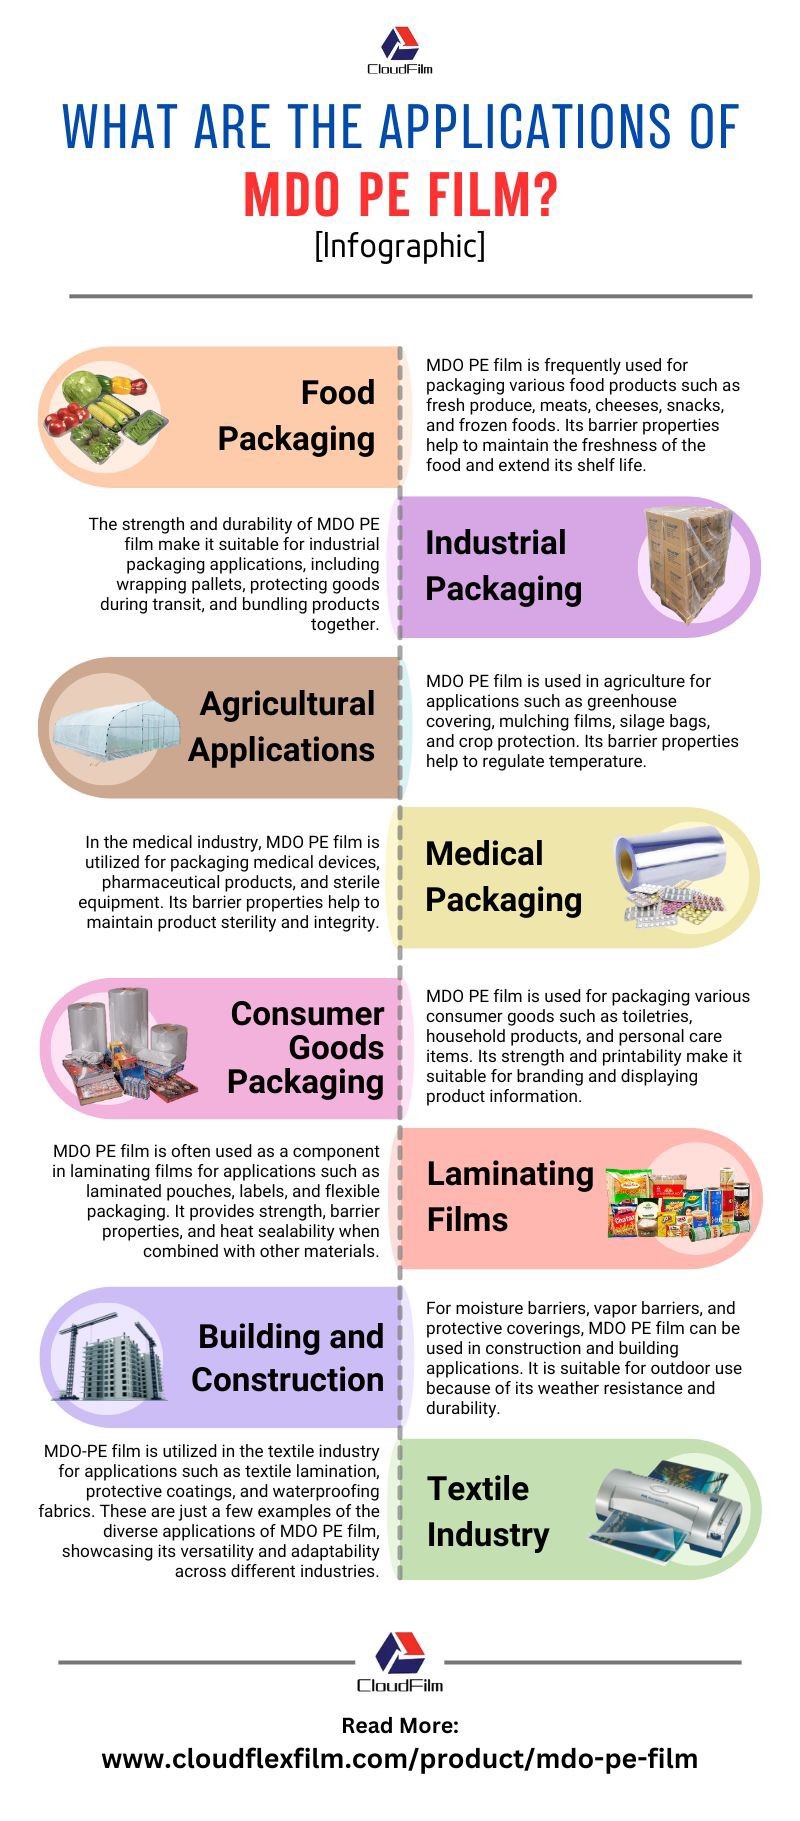 What Are the Applications of MDO PE Film? [Infographic]